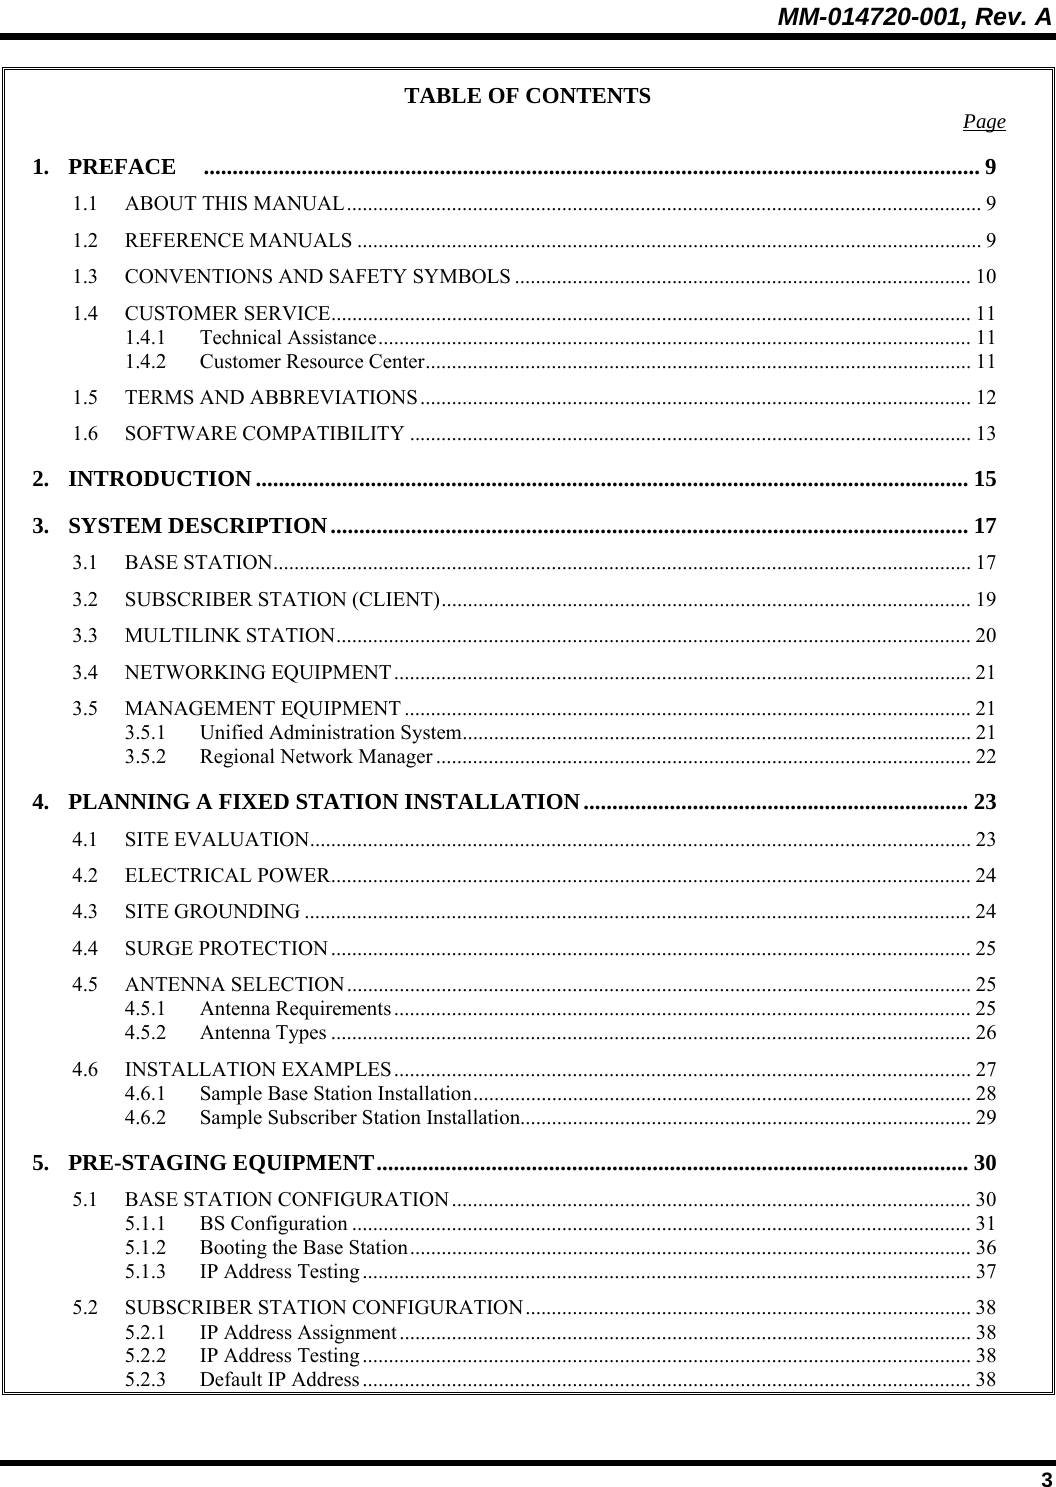 MM-014720-001, Rev. A  3 TABLE OF CONTENTS  Page 1. PREFACE ....................................................................................................................................... 9 1.1 ABOUT THIS MANUAL......................................................................................................................... 9 1.2 REFERENCE MANUALS ....................................................................................................................... 9 1.3 CONVENTIONS AND SAFETY SYMBOLS ....................................................................................... 10 1.4 CUSTOMER SERVICE.......................................................................................................................... 11 1.4.1 Technical Assistance................................................................................................................. 11 1.4.2 Customer Resource Center........................................................................................................11 1.5 TERMS AND ABBREVIATIONS.........................................................................................................12 1.6 SOFTWARE COMPATIBILITY ........................................................................................................... 13 2. INTRODUCTION ............................................................................................................................ 15 3. SYSTEM DESCRIPTION............................................................................................................... 17 3.1 BASE STATION..................................................................................................................................... 17 3.2 SUBSCRIBER STATION (CLIENT).....................................................................................................19 3.3 MULTILINK STATION......................................................................................................................... 20 3.4 NETWORKING EQUIPMENT.............................................................................................................. 21 3.5 MANAGEMENT EQUIPMENT ............................................................................................................21 3.5.1 Unified Administration System................................................................................................. 21 3.5.2 Regional Network Manager ...................................................................................................... 22 4. PLANNING A FIXED STATION INSTALLATION................................................................... 23 4.1 SITE EVALUATION.............................................................................................................................. 23 4.2 ELECTRICAL POWER.......................................................................................................................... 24 4.3 SITE GROUNDING ............................................................................................................................... 24 4.4 SURGE PROTECTION.......................................................................................................................... 25 4.5 ANTENNA SELECTION....................................................................................................................... 25 4.5.1 Antenna Requirements .............................................................................................................. 25 4.5.2 Antenna Types .......................................................................................................................... 26 4.6 INSTALLATION EXAMPLES.............................................................................................................. 27 4.6.1 Sample Base Station Installation............................................................................................... 28 4.6.2 Sample Subscriber Station Installation...................................................................................... 29 5. PRE-STAGING EQUIPMENT....................................................................................................... 30 5.1 BASE STATION CONFIGURATION ................................................................................................... 30 5.1.1 BS Configuration ...................................................................................................................... 31 5.1.2 Booting the Base Station........................................................................................................... 36 5.1.3 IP Address Testing .................................................................................................................... 37 5.2 SUBSCRIBER STATION CONFIGURATION..................................................................................... 38 5.2.1 IP Address Assignment............................................................................................................. 38 5.2.2 IP Address Testing .................................................................................................................... 38 5.2.3 Default IP Address .................................................................................................................... 38 